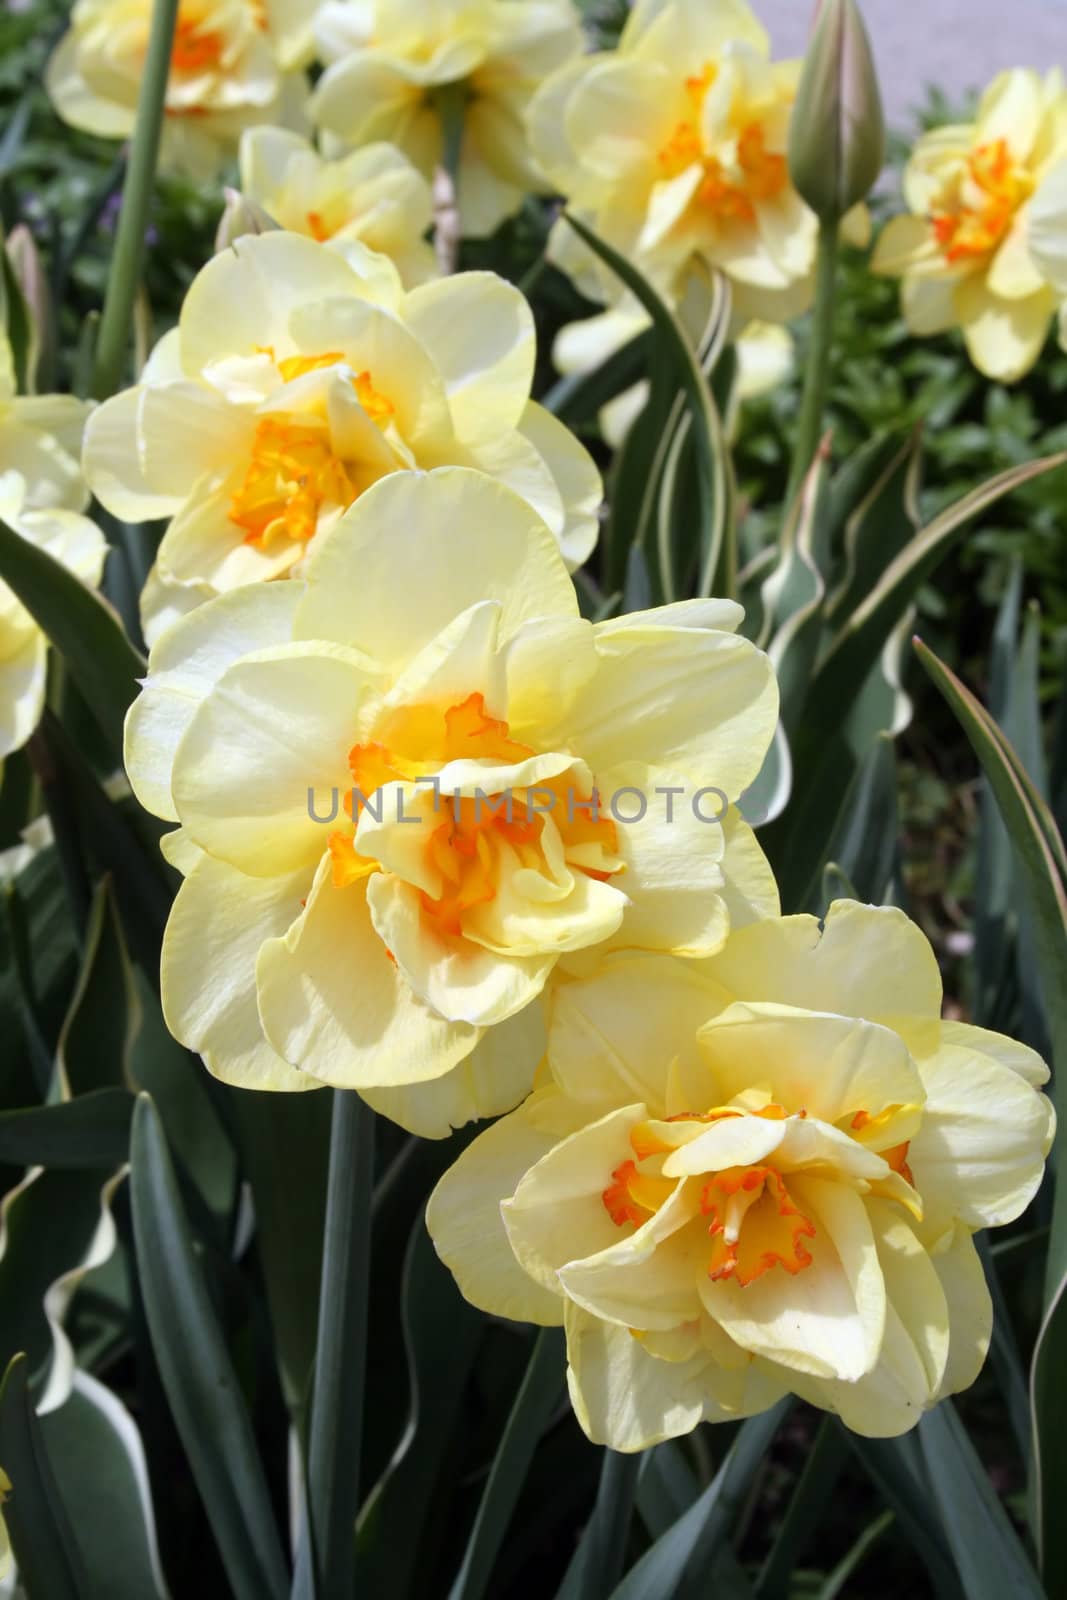 colorful yellow daffodils blooming in Spring